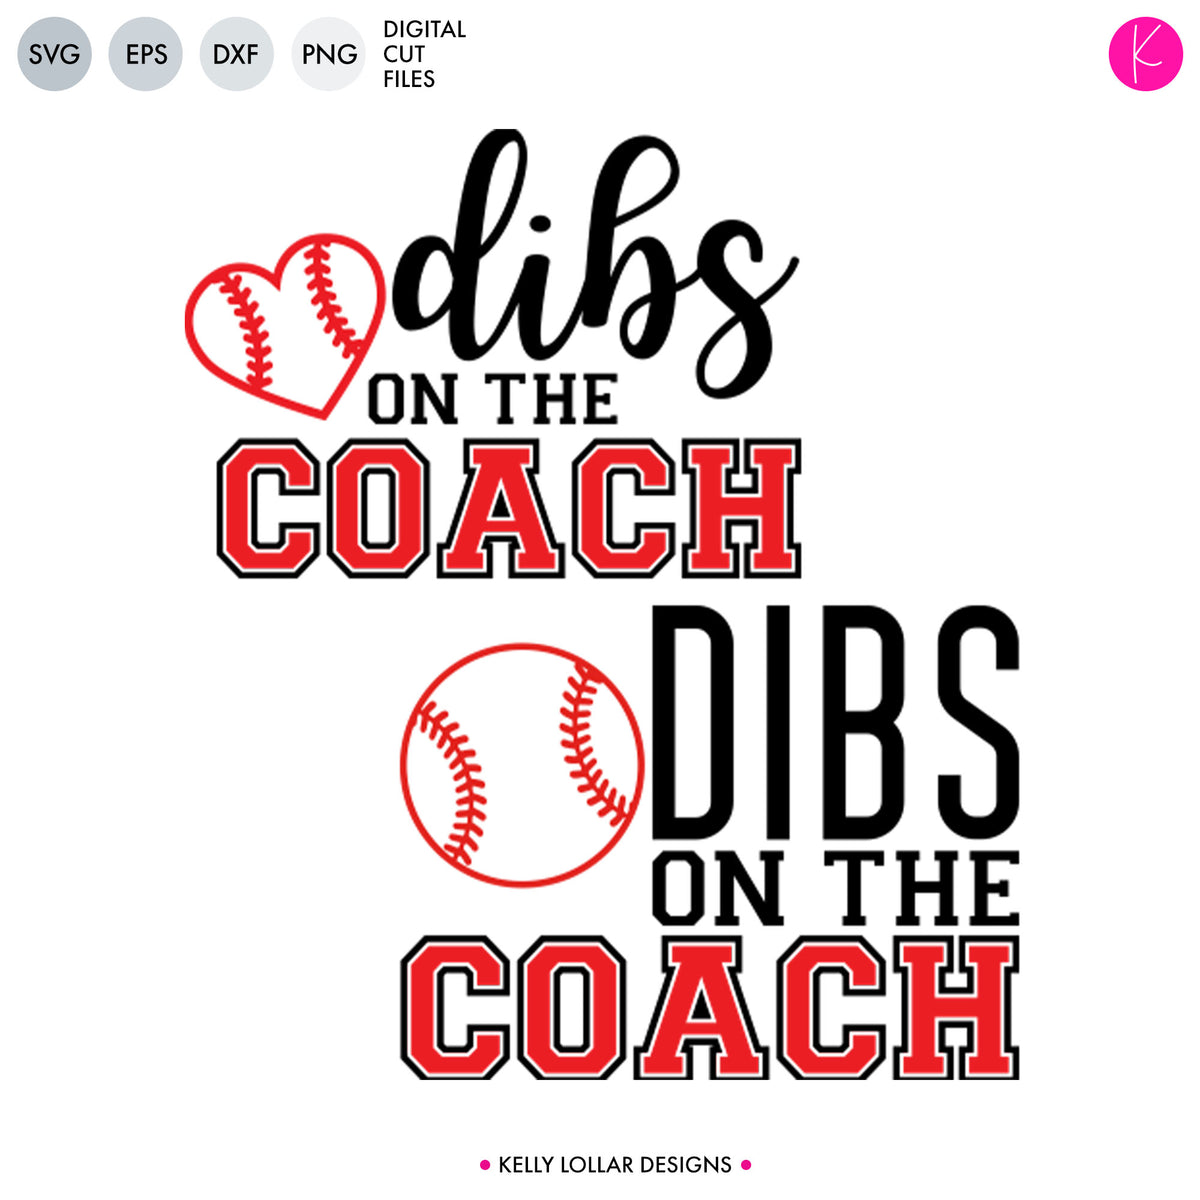 Dibs on the Coach | SVG DXF EPS PNG Cut Files